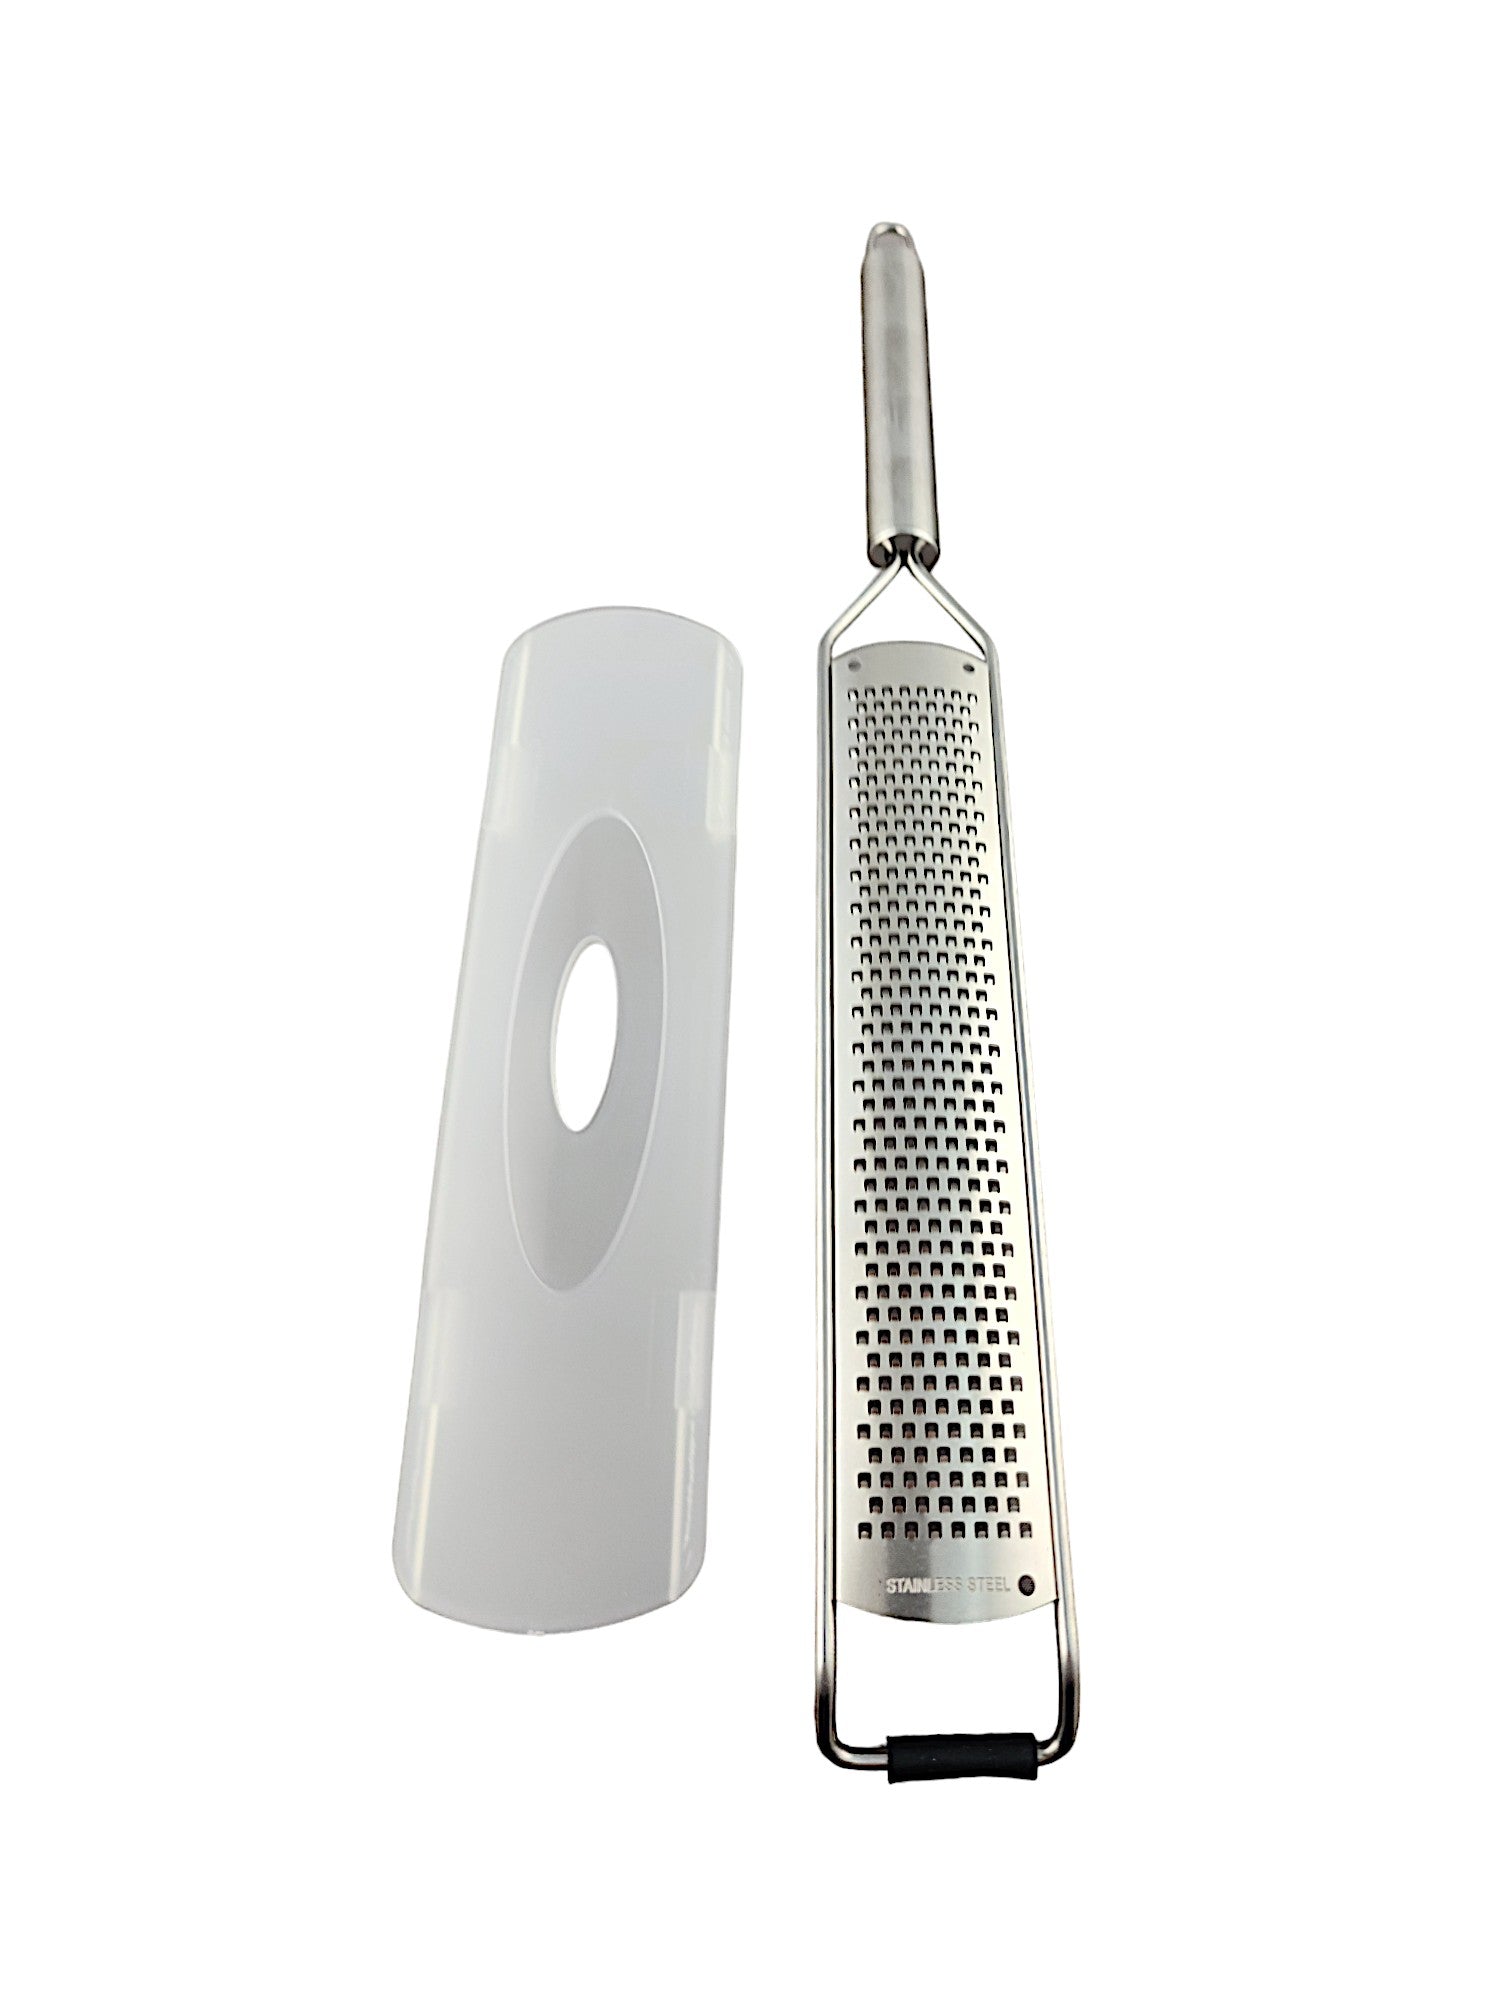 Premium Stainless Steel Zester Grater: Zest Up Your Culinary Creations